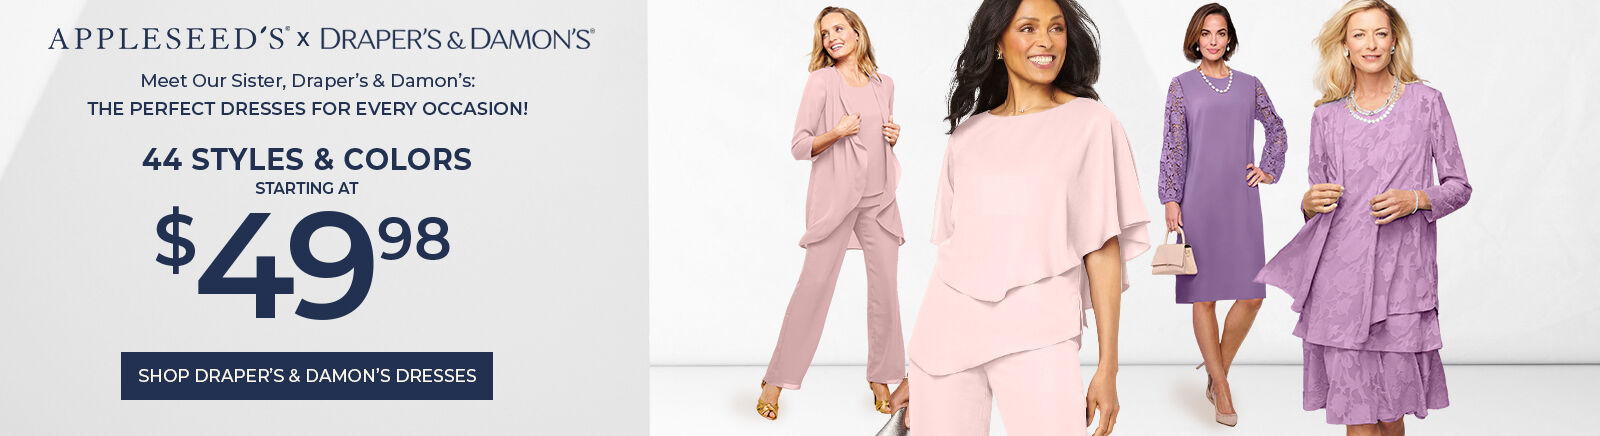 appleseed's x Draper's & Damon's meet our sister, Draper;s & Damon's: the perfect dresses for every occasion! 44 styles & colors starting at $49.98 shop draper's & damon's dresses